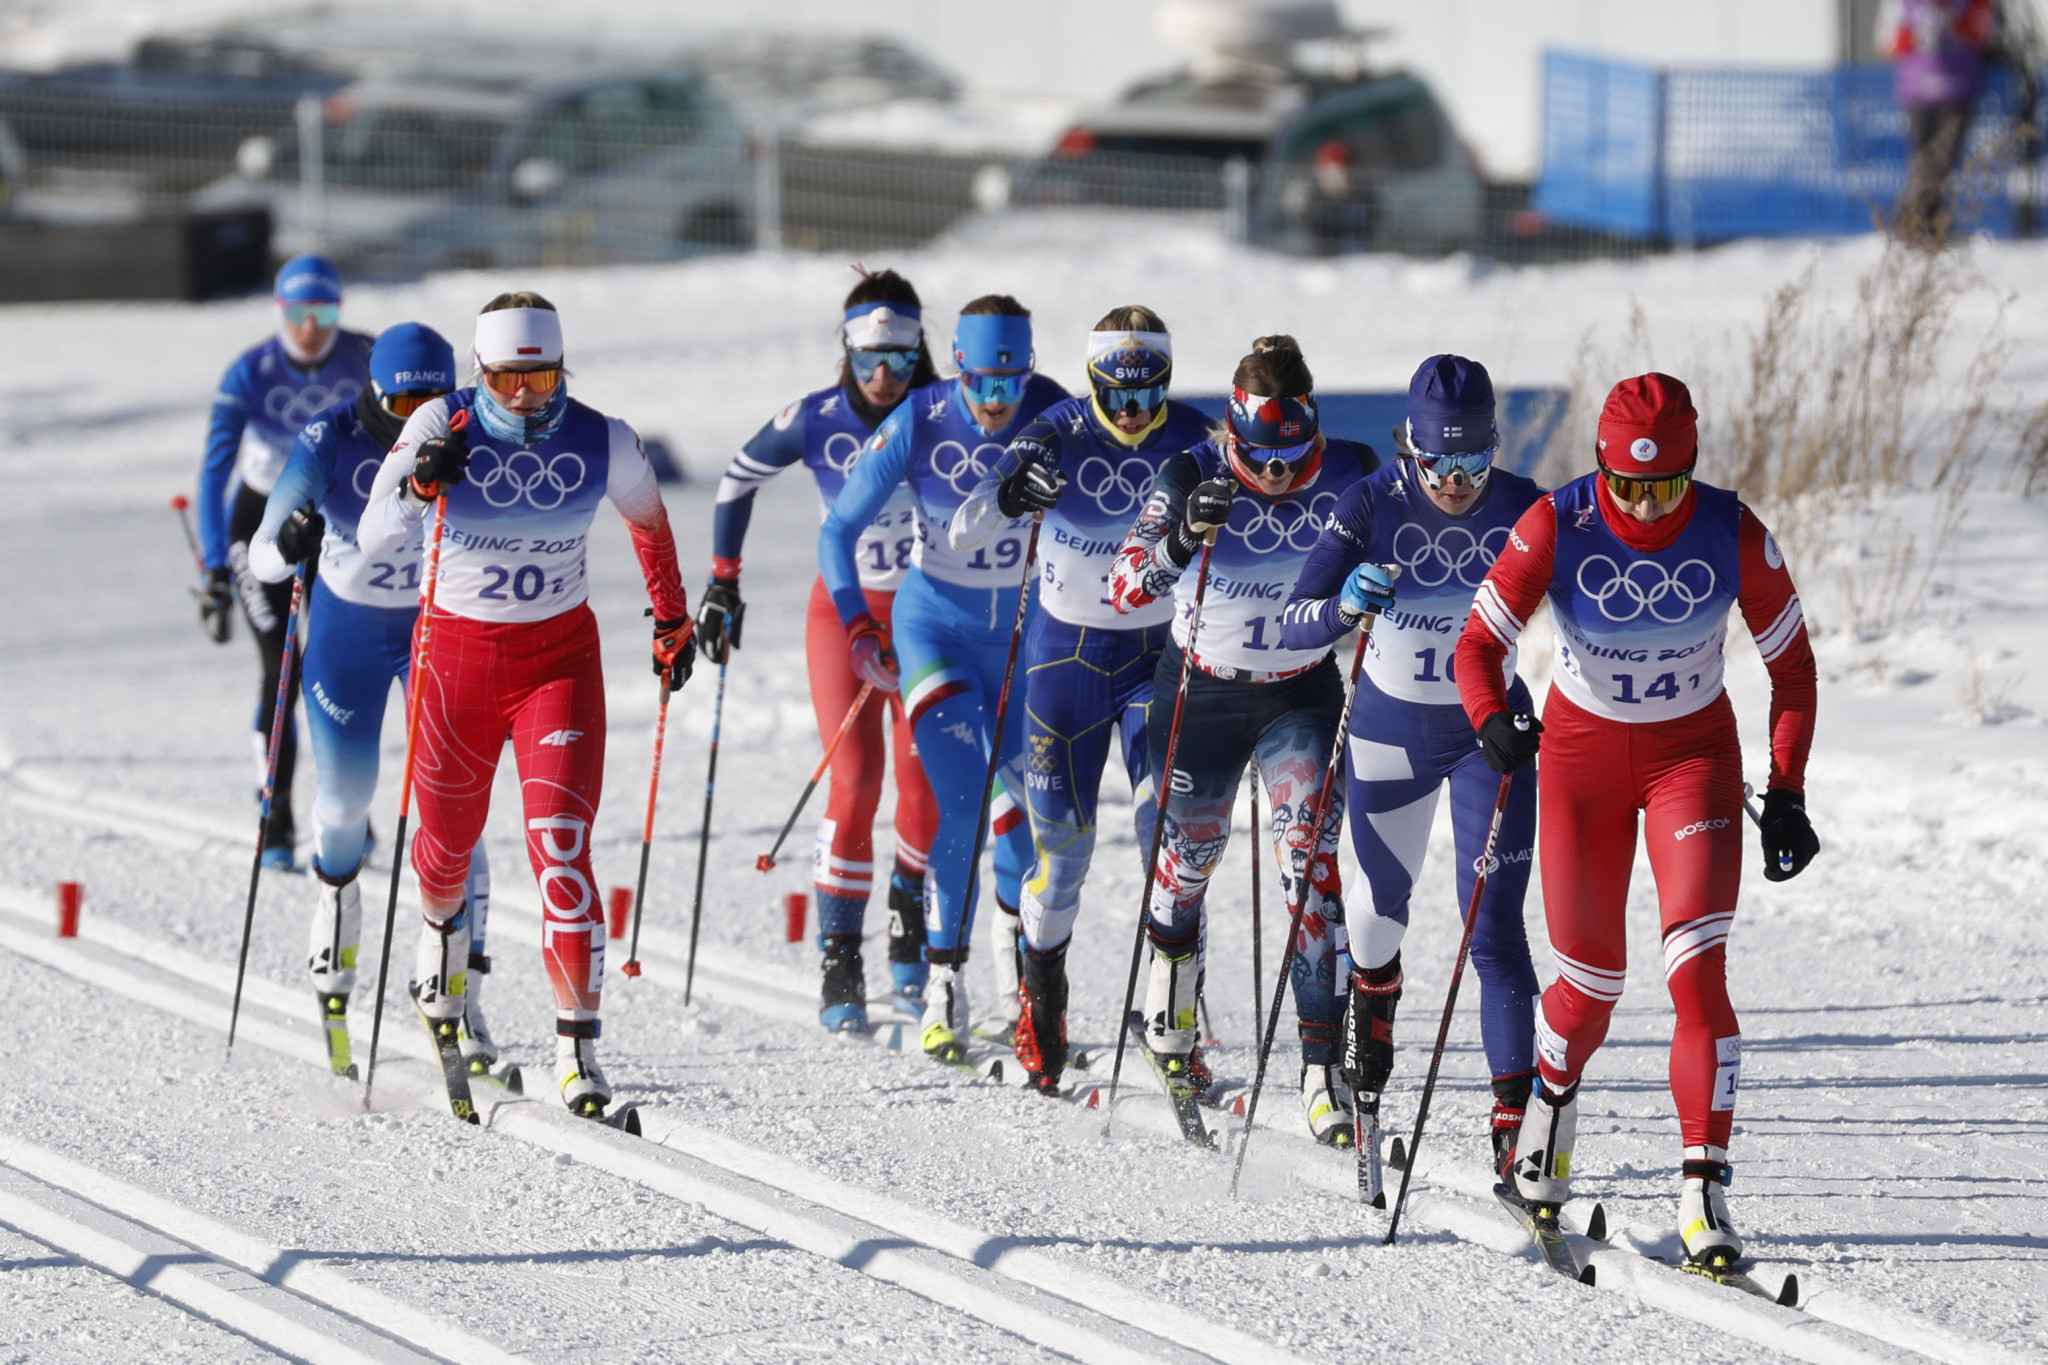 FIS Council maintain ban on Russian and Belarusian participation at competitions